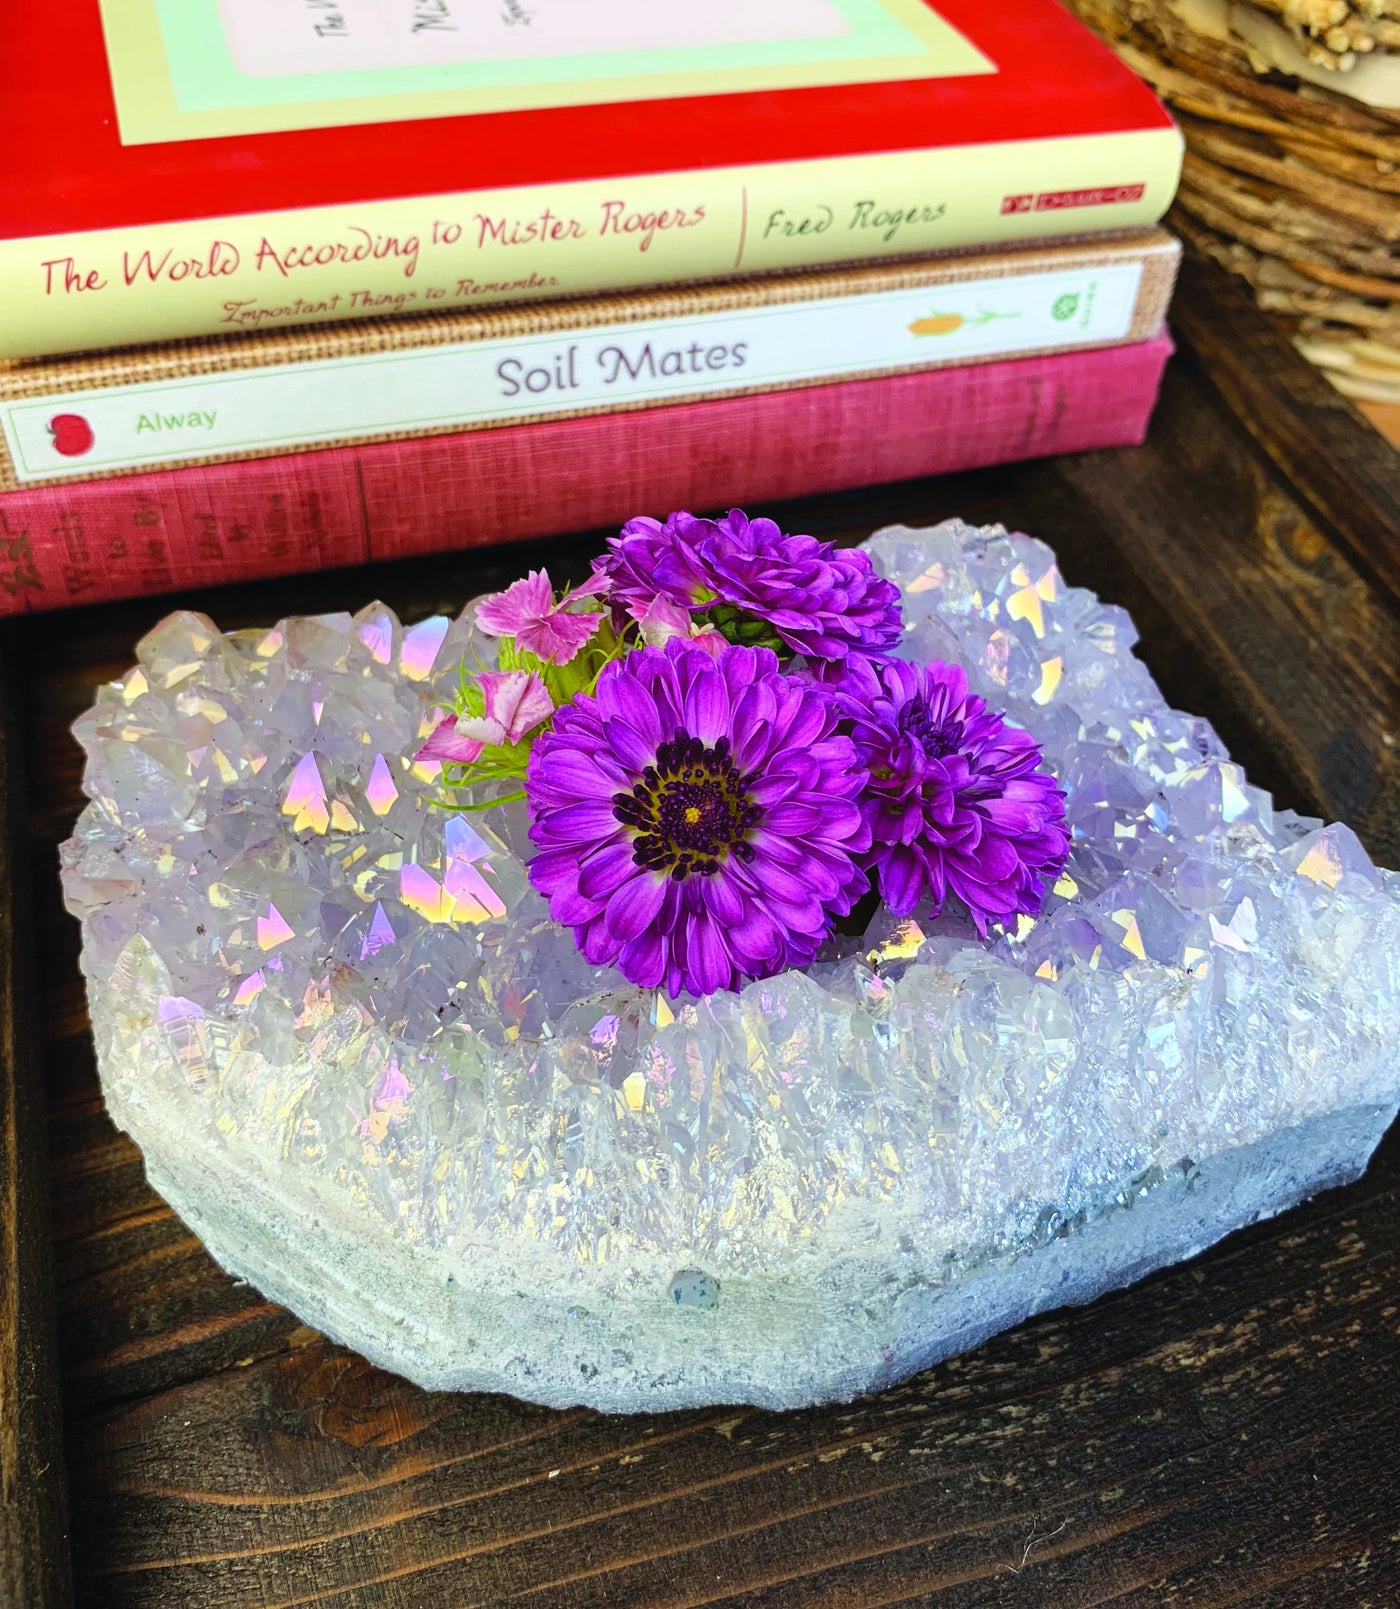 titanium amethyst candle holder with flowers inside and books in the background